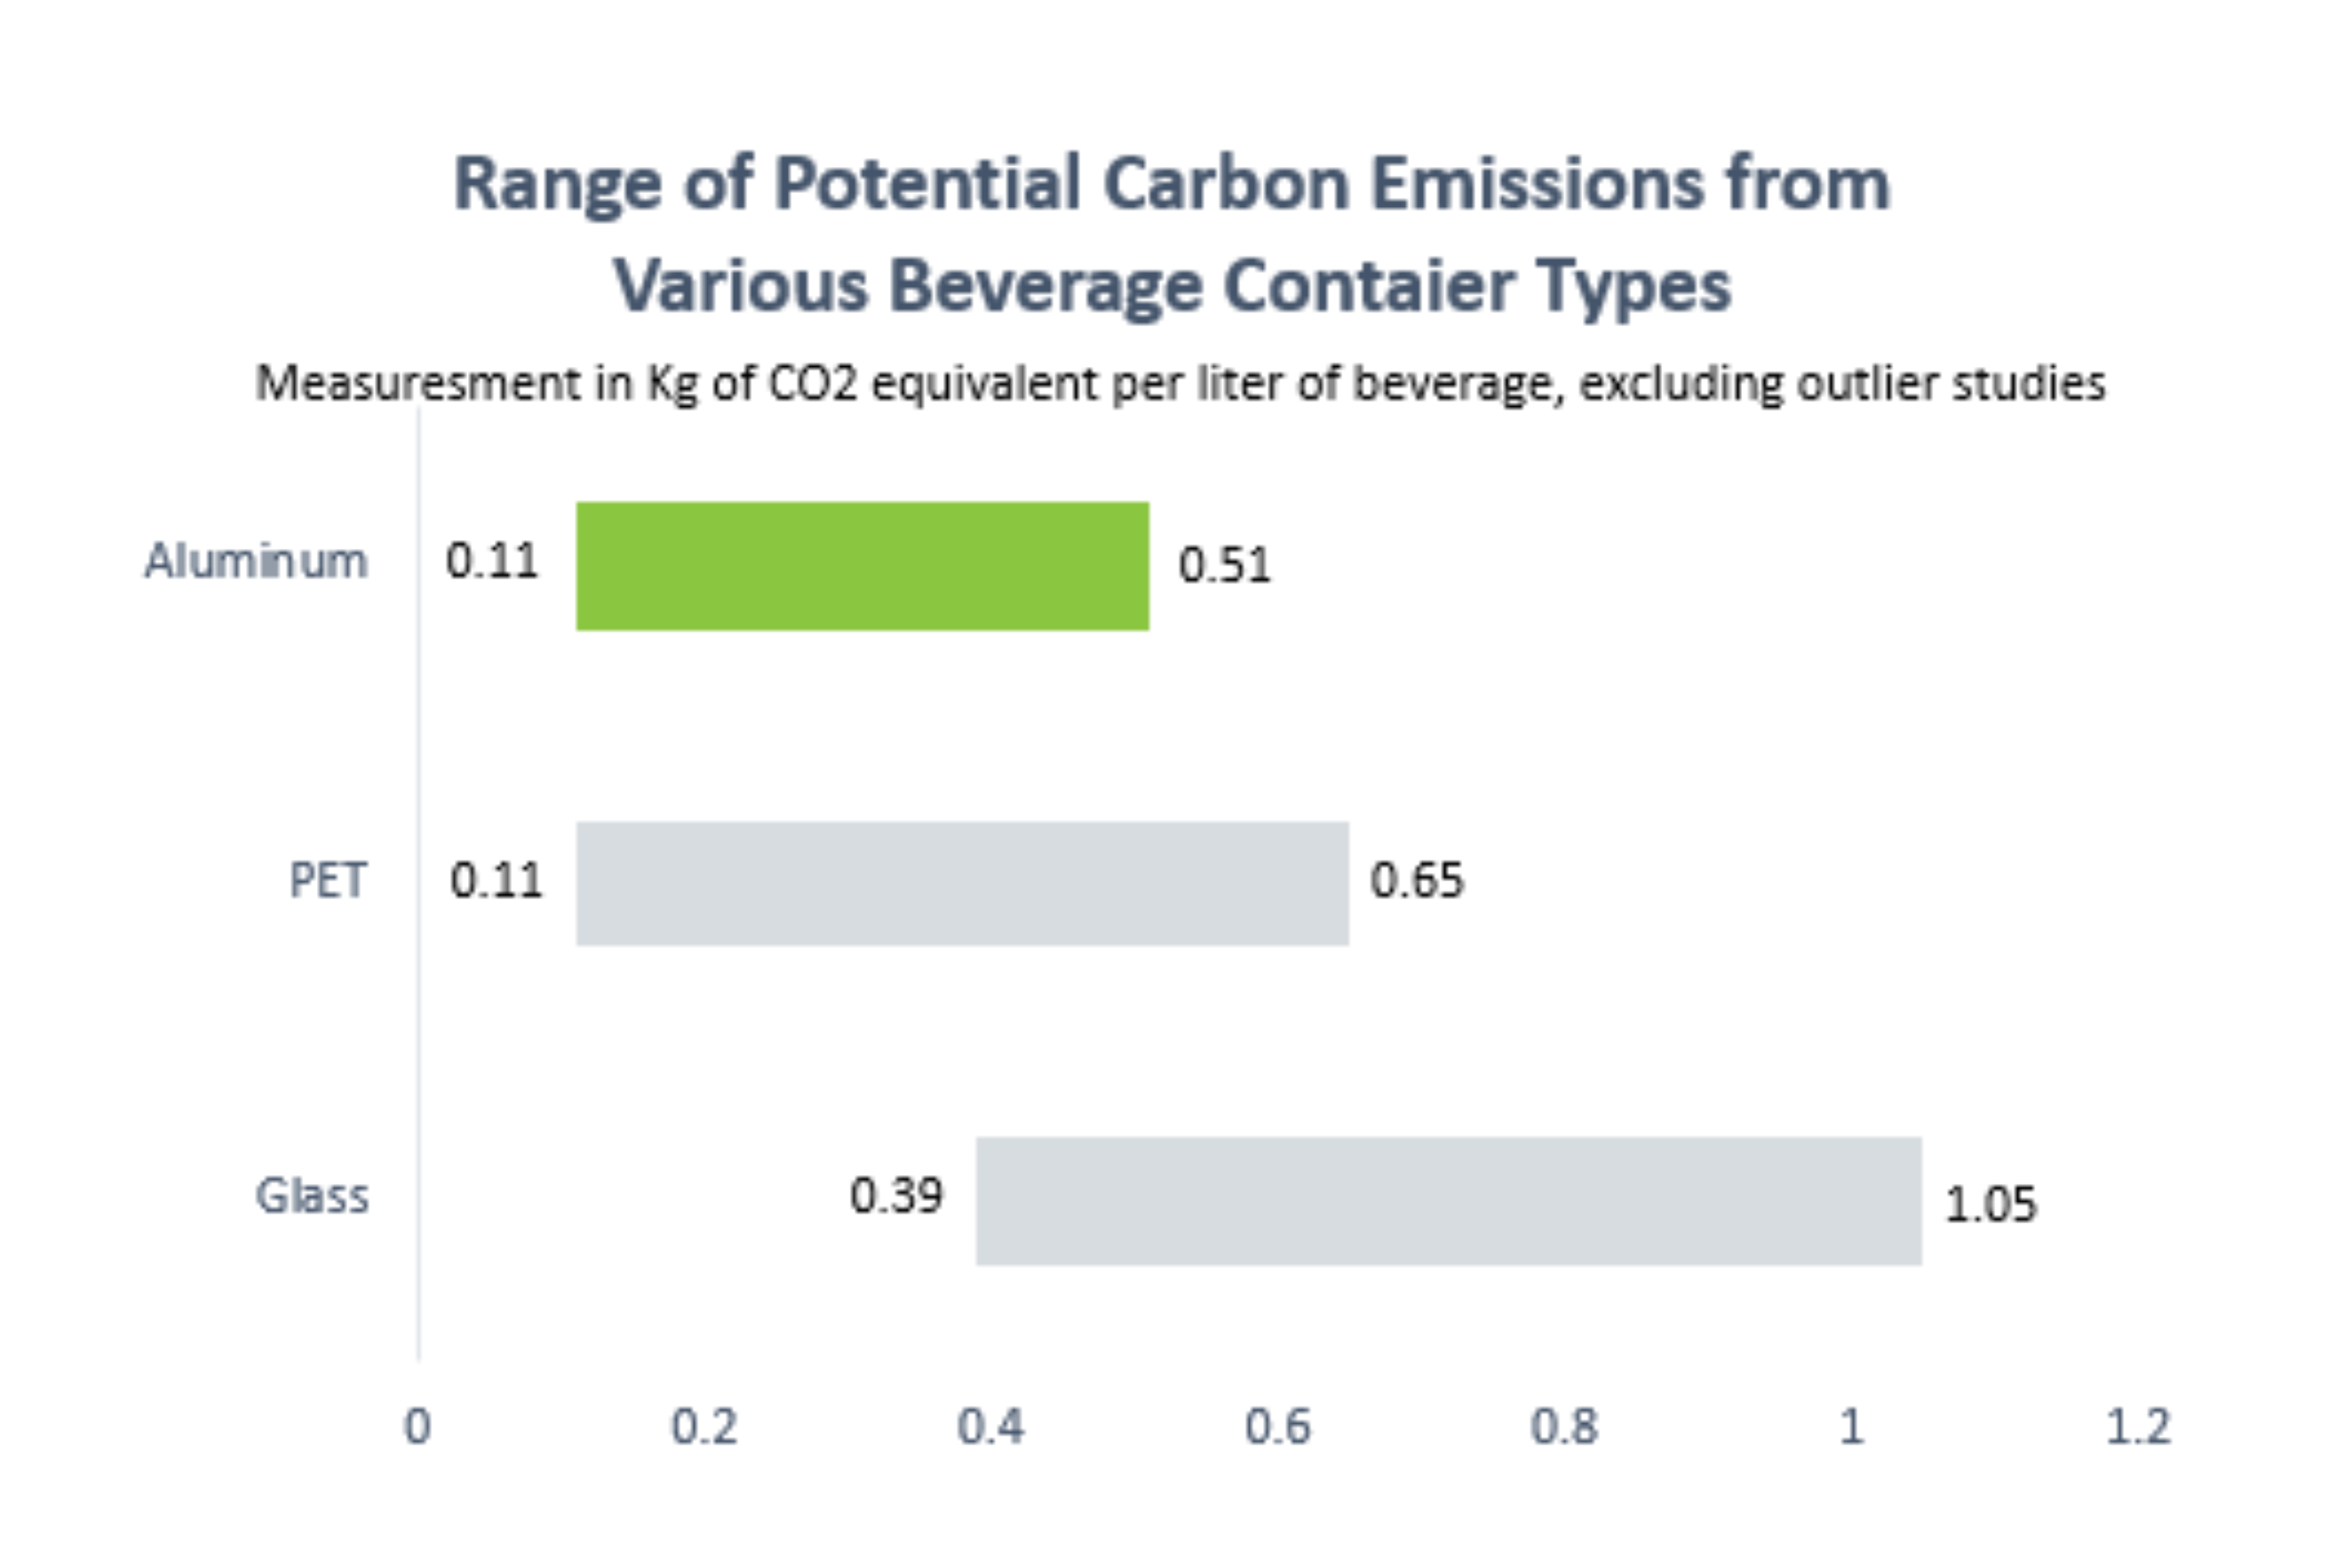 Chart showing range of potential carbon emissions from various beverage container types